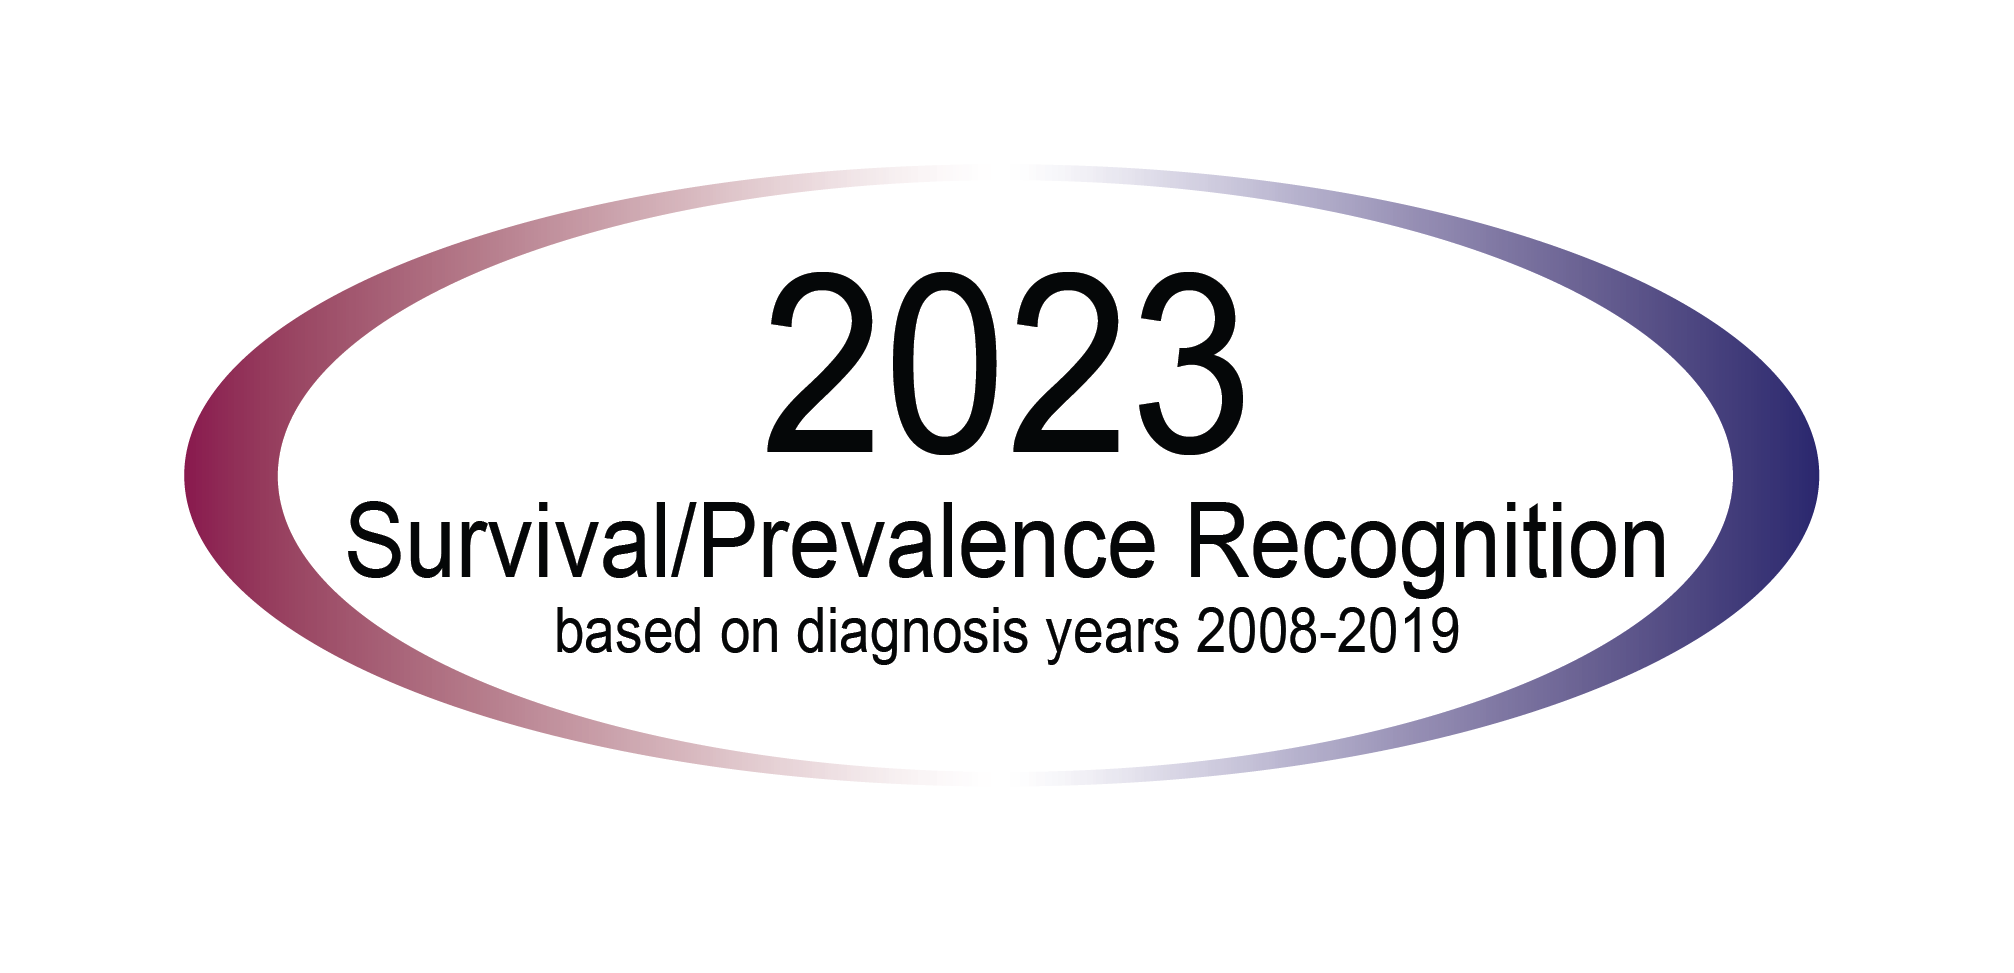  North American Association of Central Cancer Registries (NAACCR) Survival and Prevalence Recognition Seal 2022